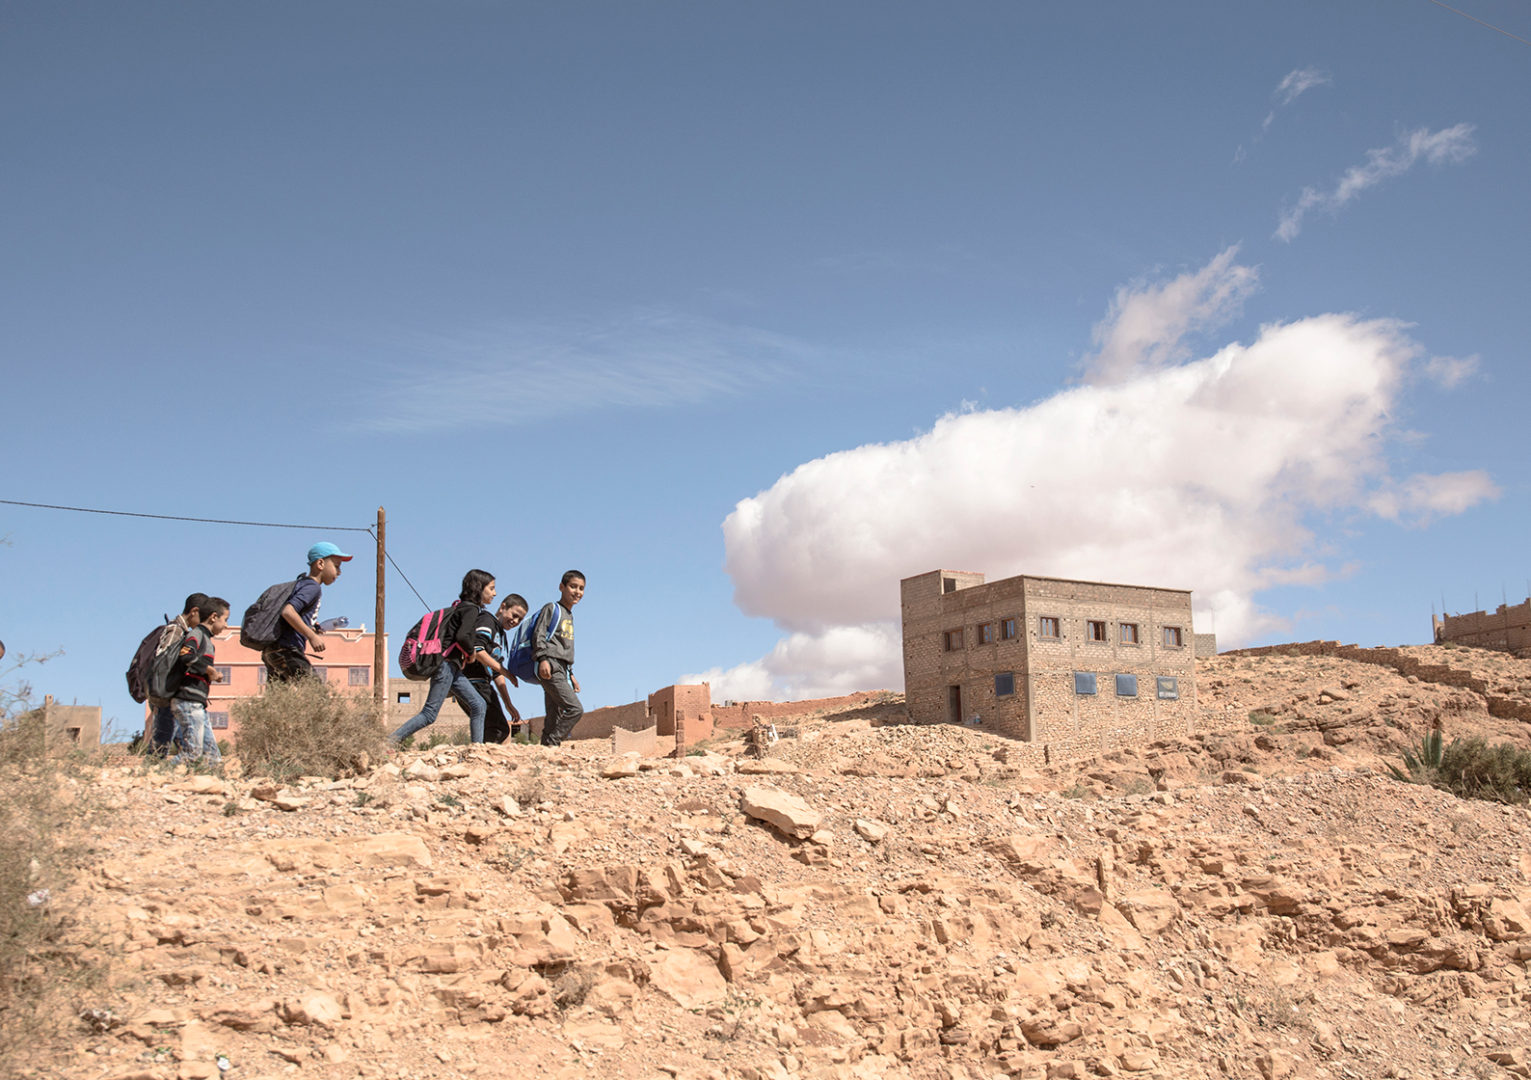 Moroccan Children on their way home.